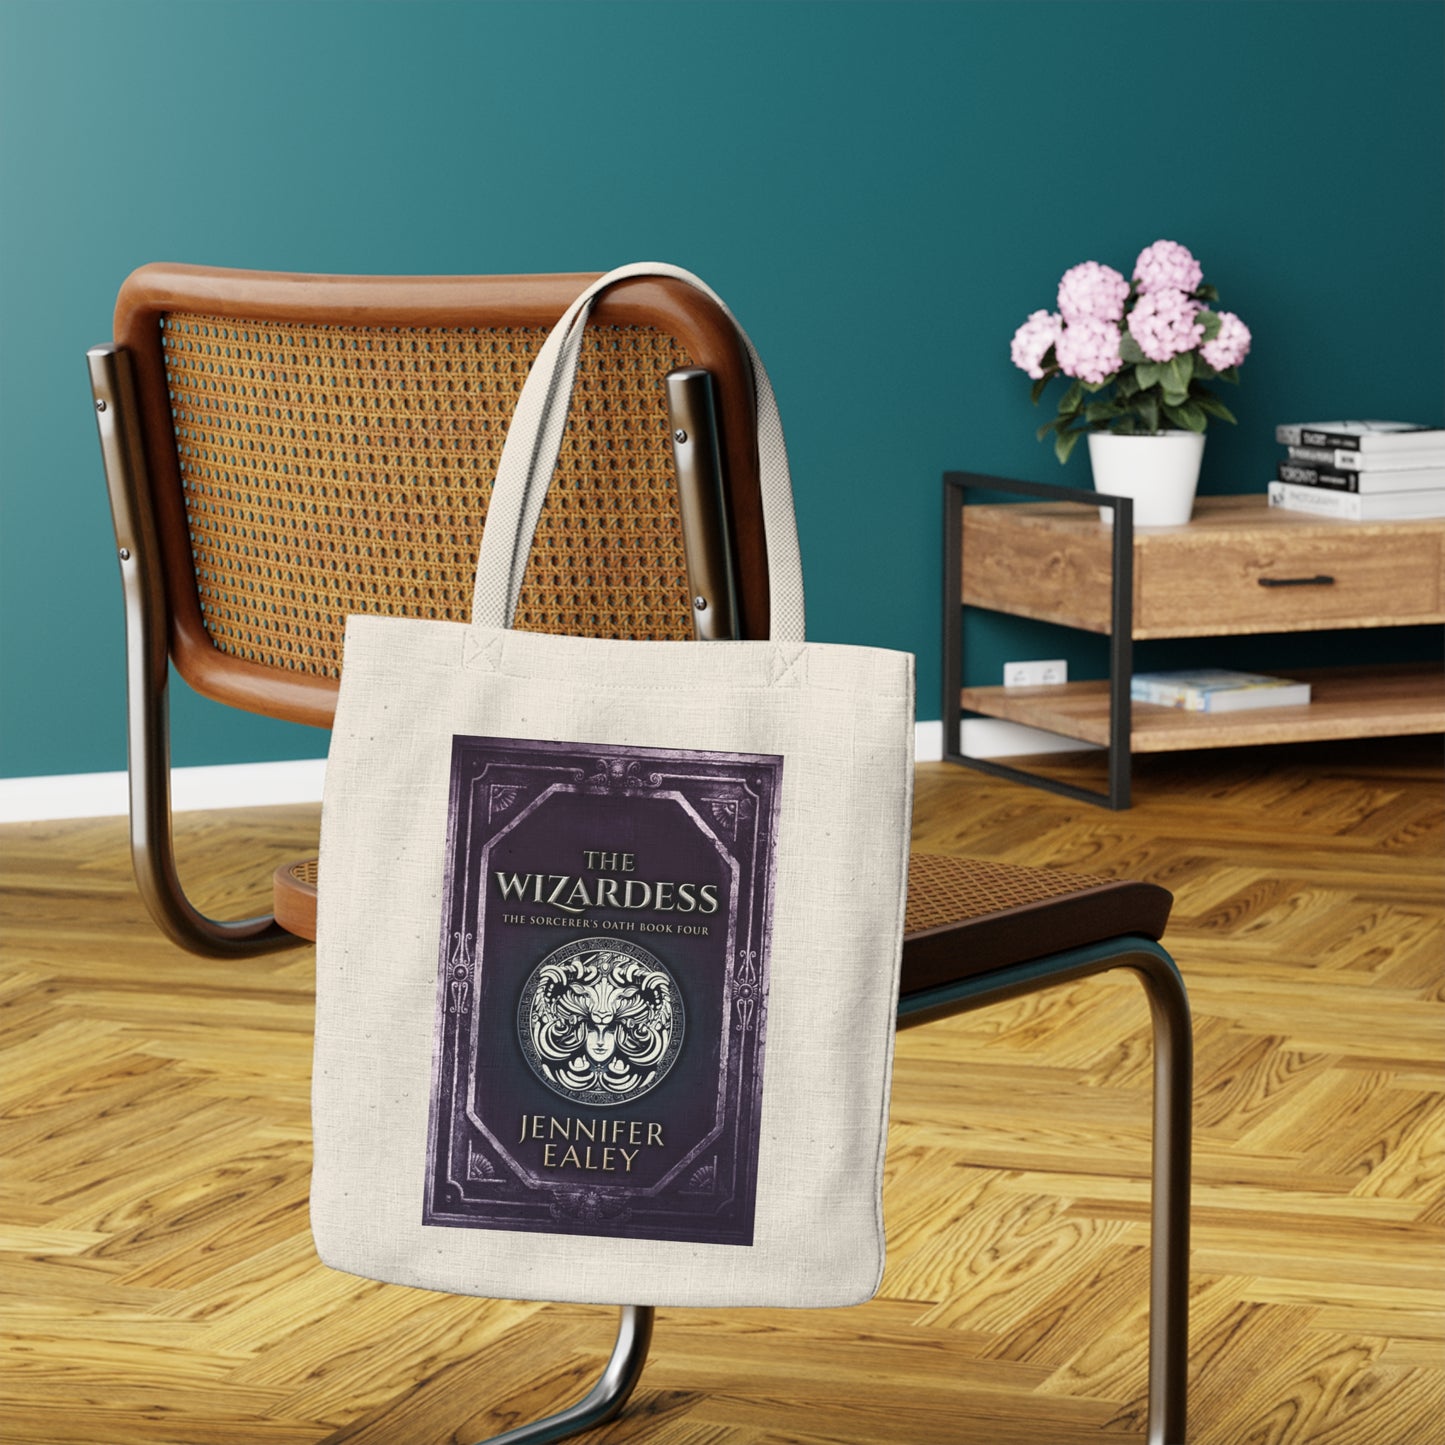 The Wizardess - Lightweight Tote Bag